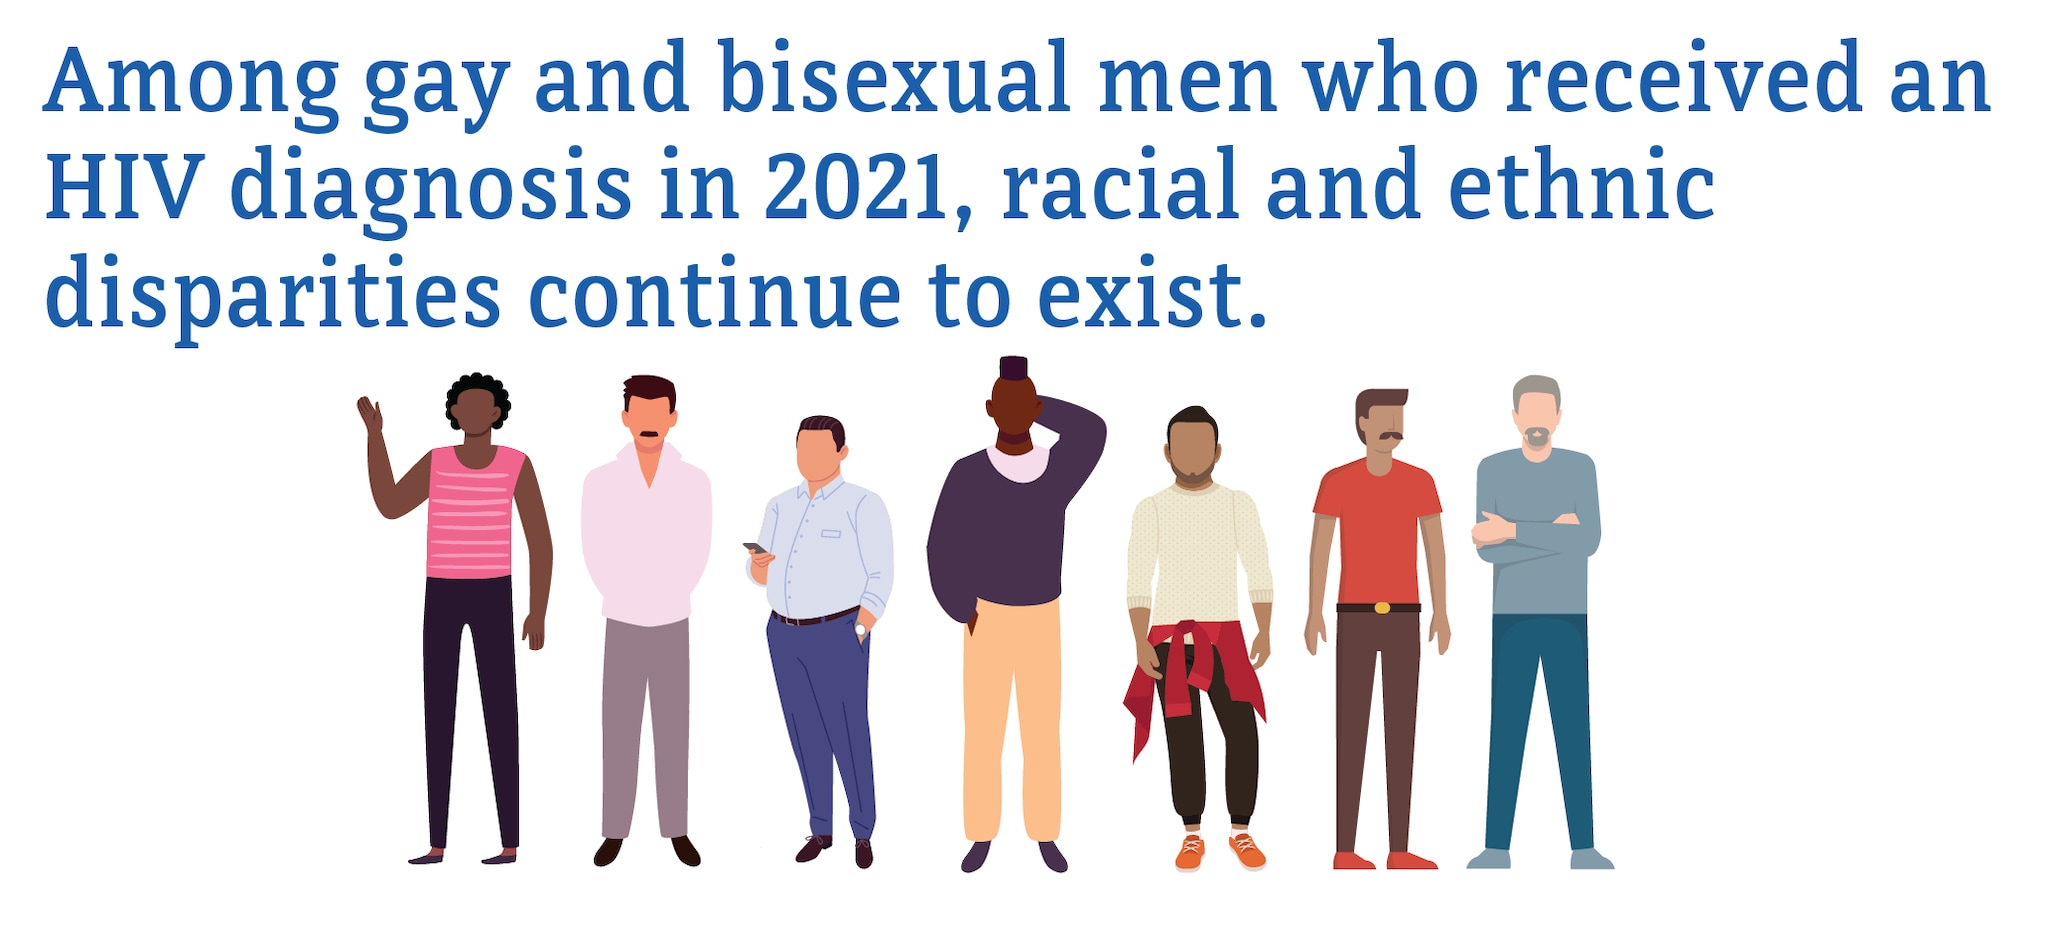 Among gay and bisexual men who received an HIV diagnosis, racial and ethnic disparities continue to exist.